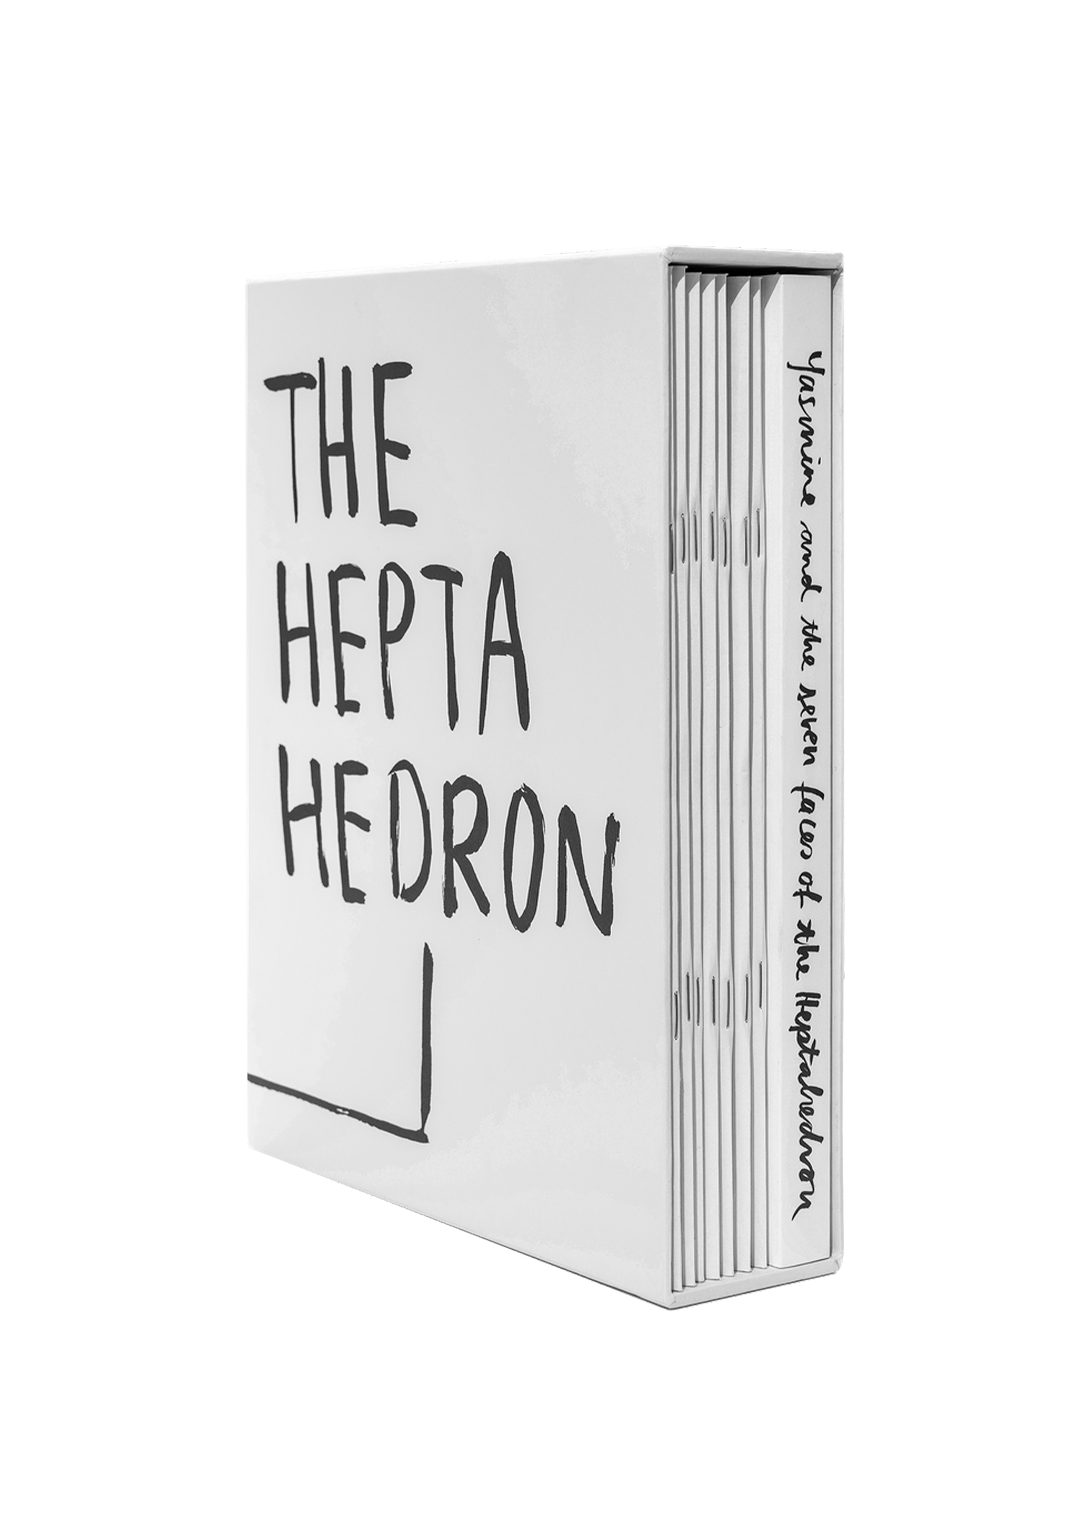 The Heptahedron. Complete Series of Side Magazine